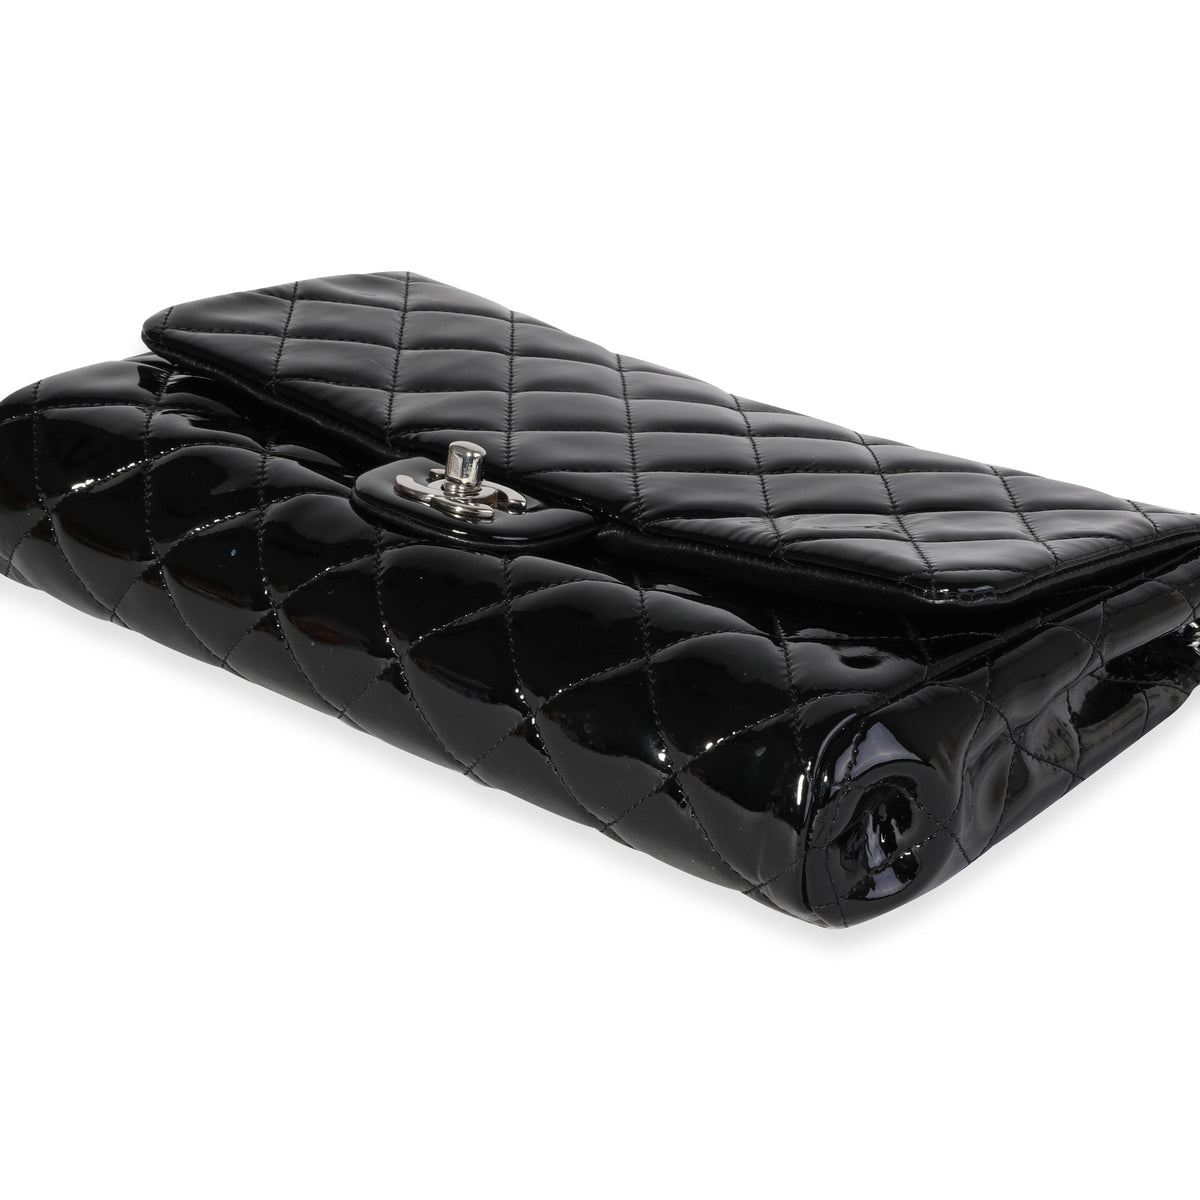 Chanel Black Quilted Patent Leather Classic Flap Clutch with Chain